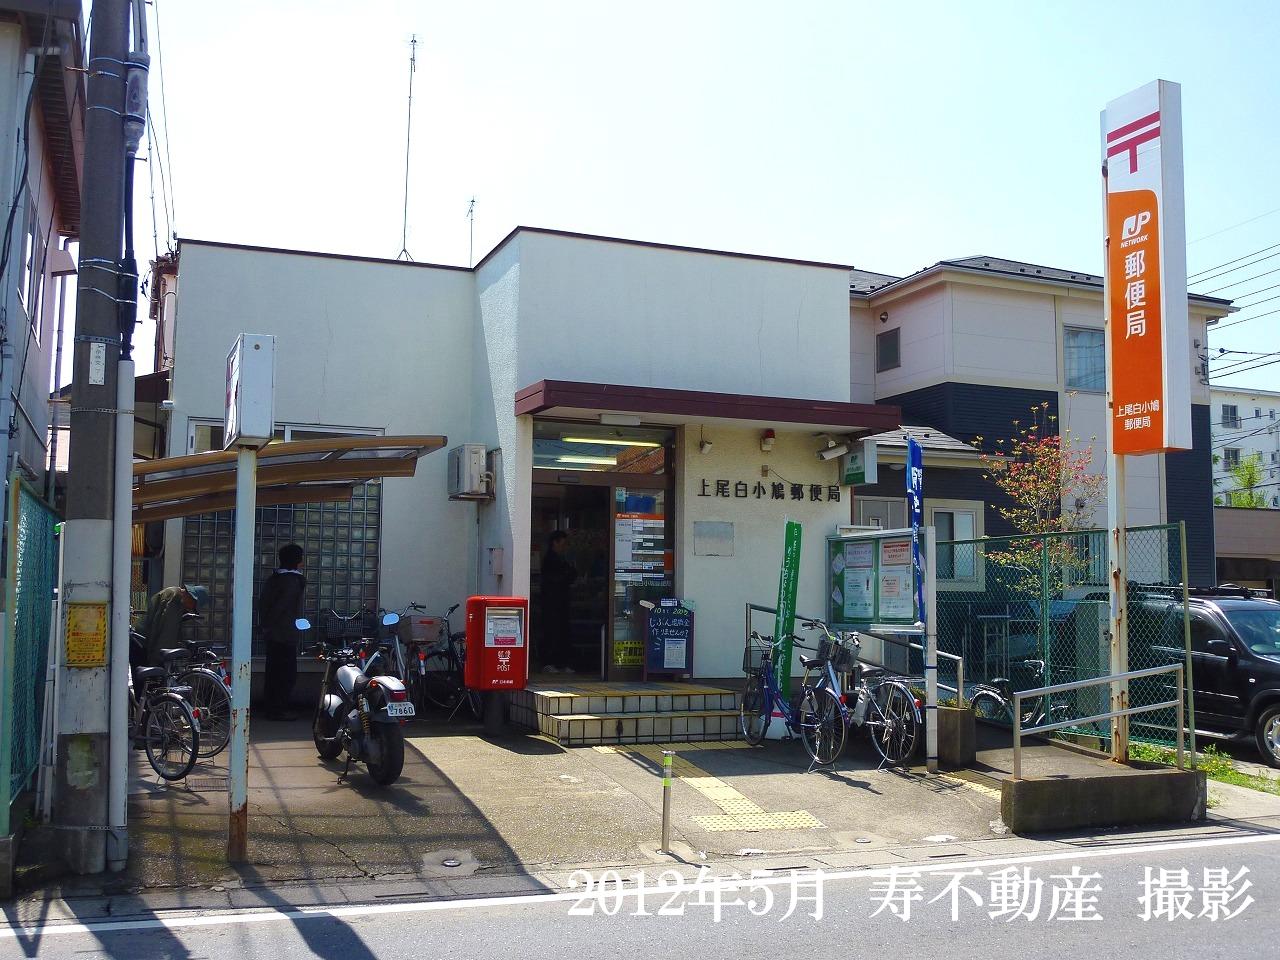 post office. Ageo white Kobato 558m to the post office (post office)